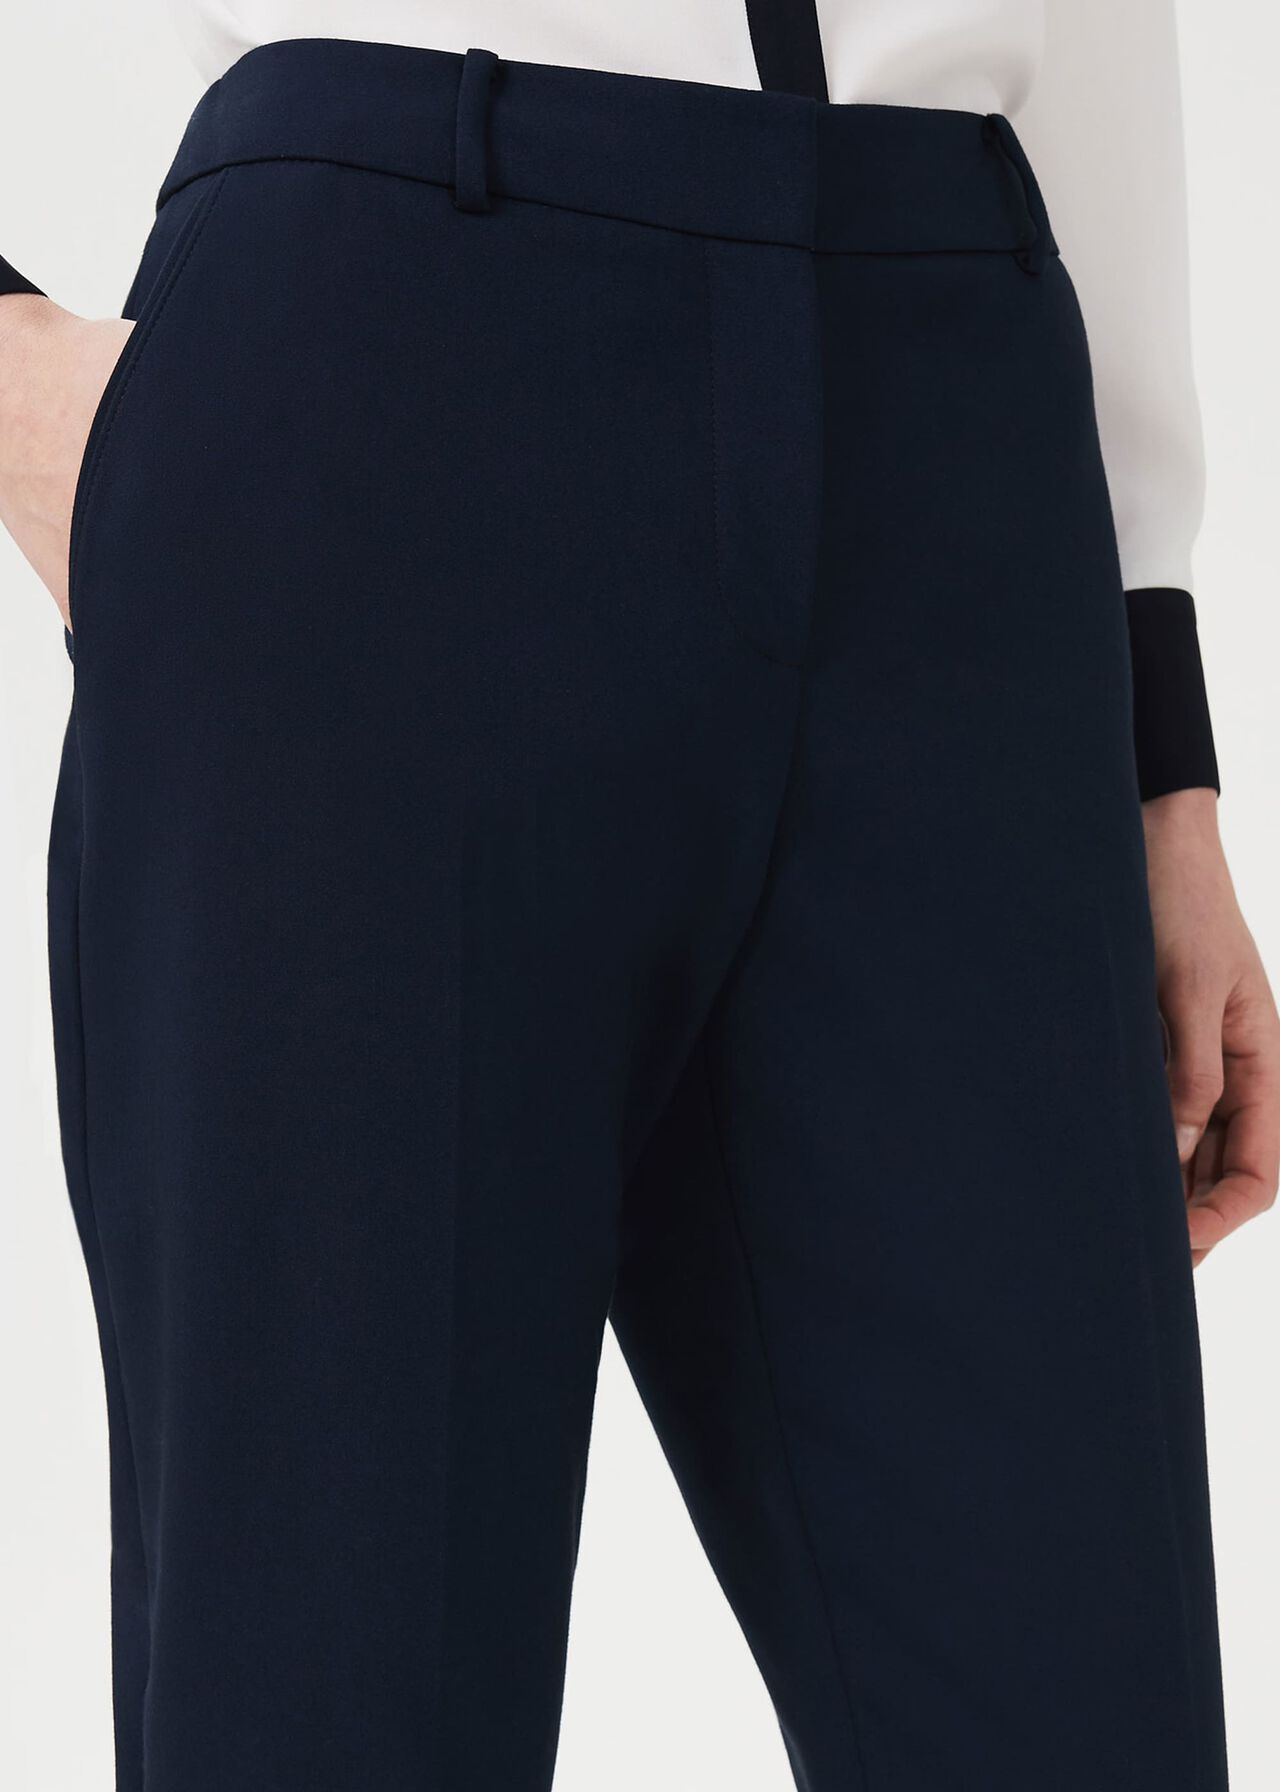 Quin Tapered Pants With Stretch, Navy, hi-res